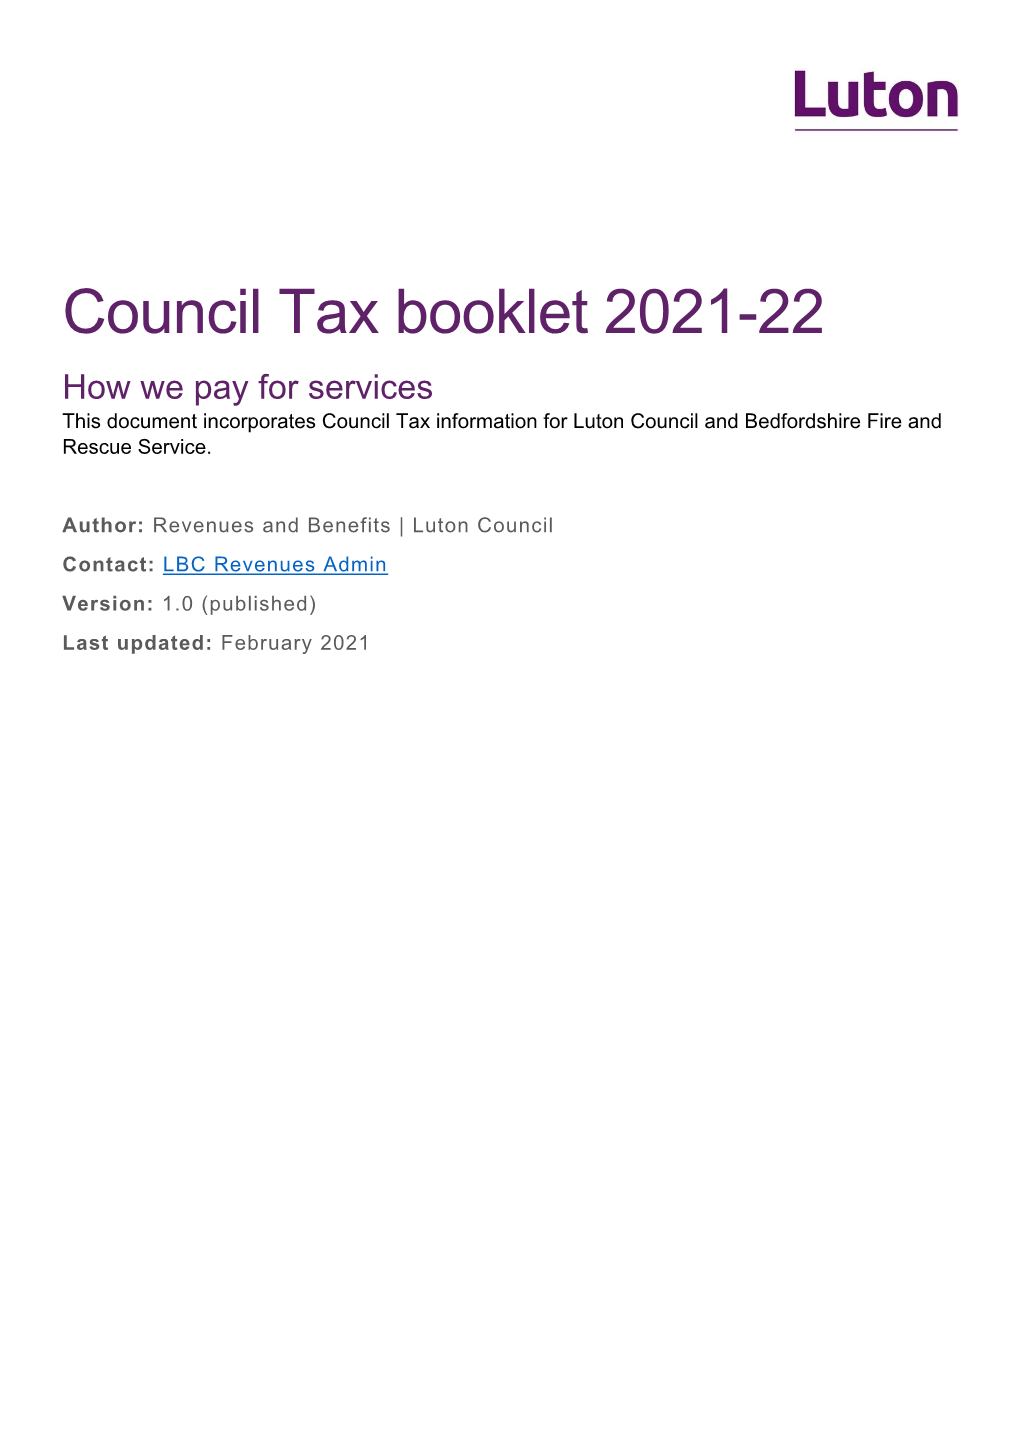 Council Tax Guide